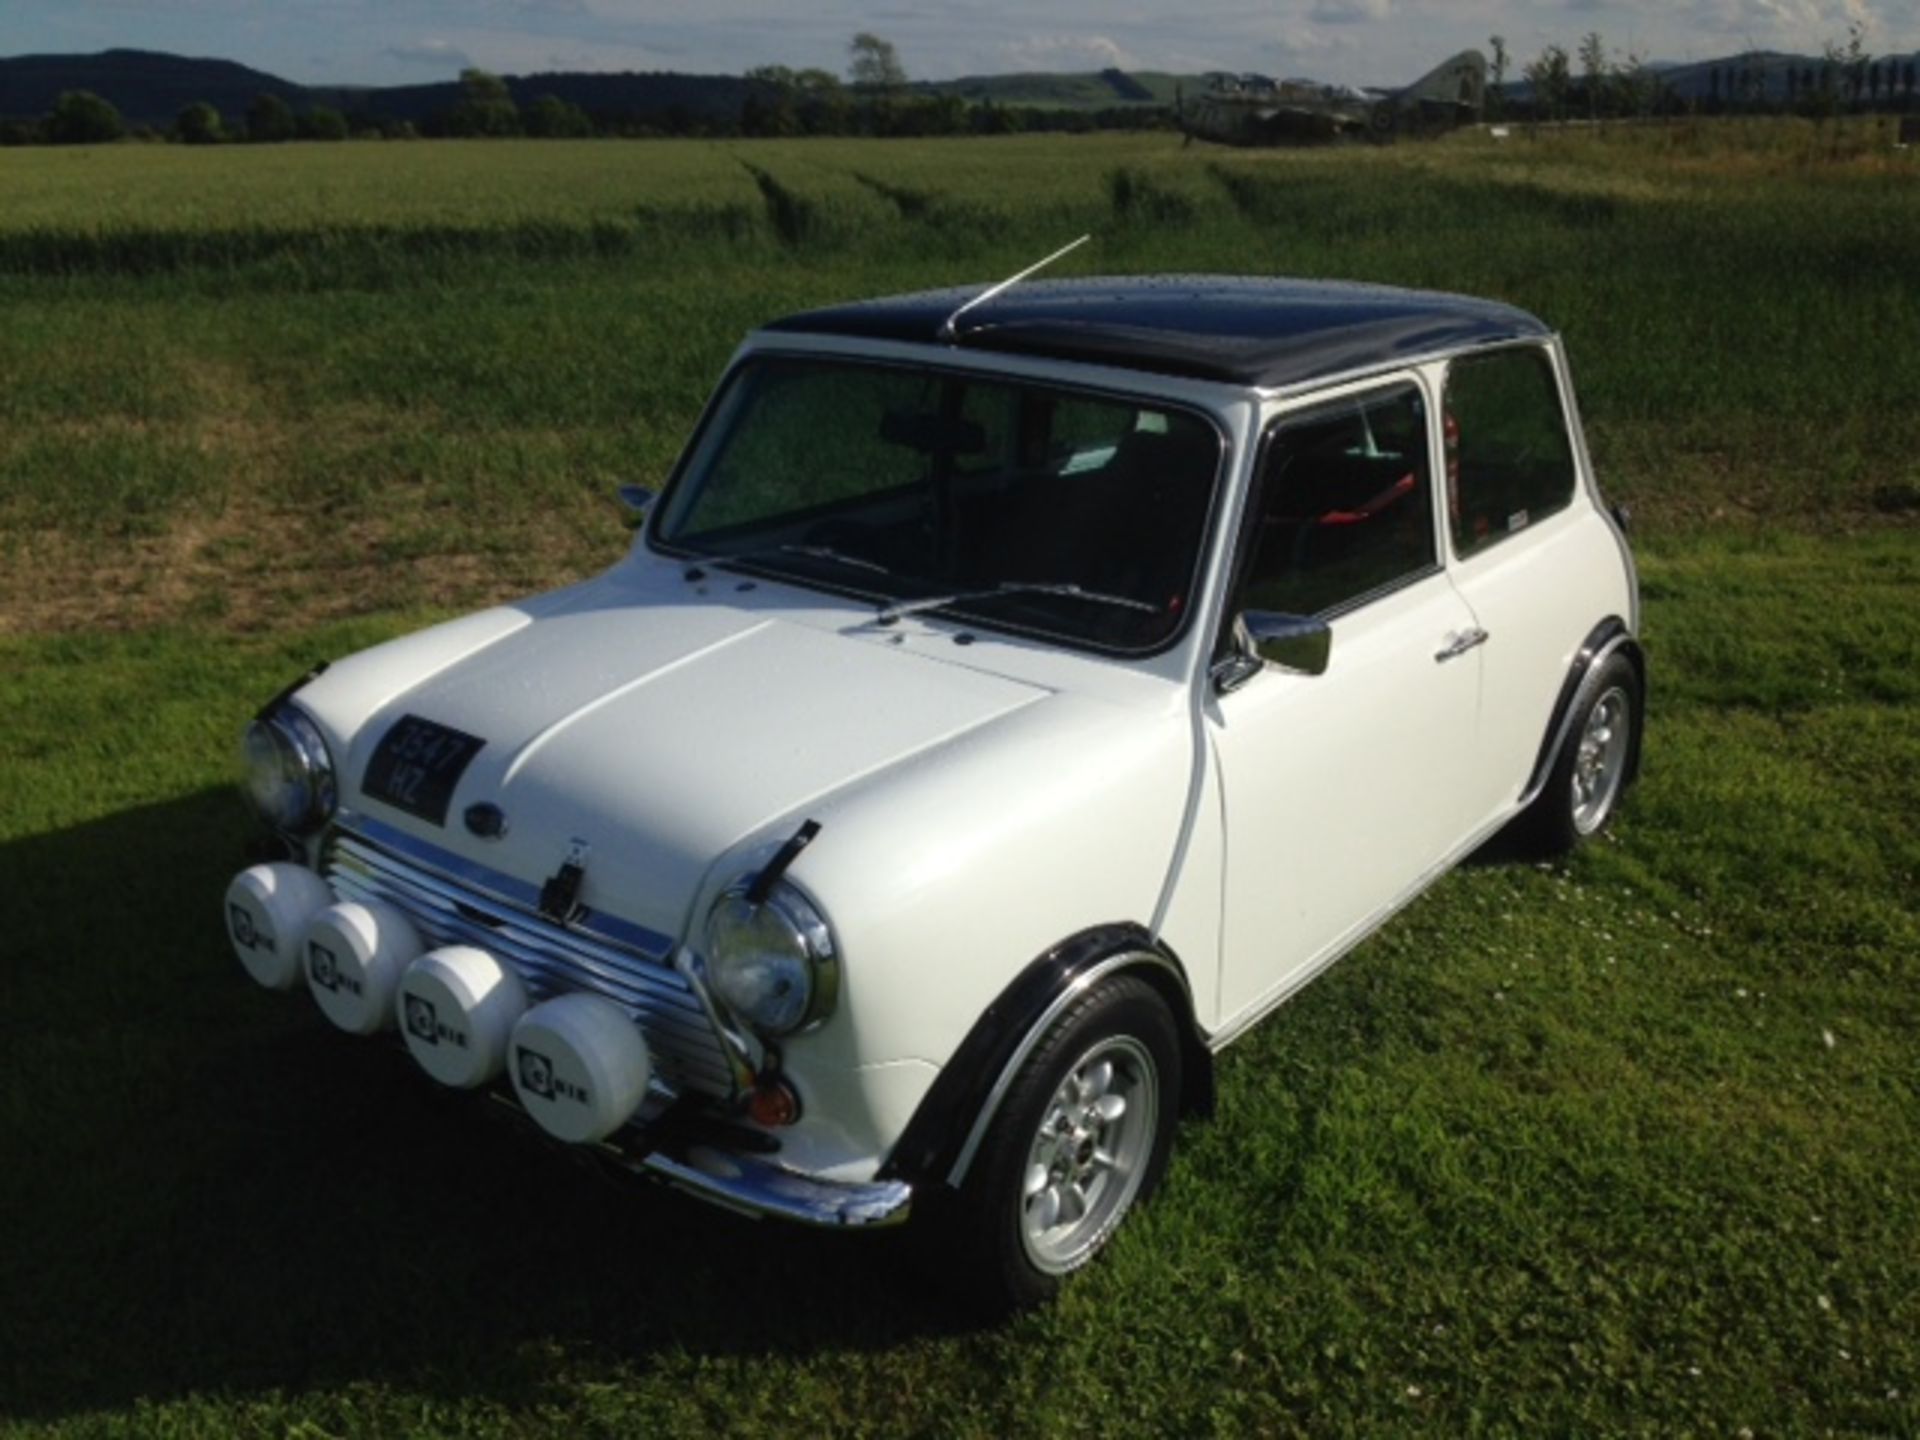 AUSTIN MORRIS, MINI HL - 1275cc, Chassis number XL2S1N10743587 - presented with an MOT test